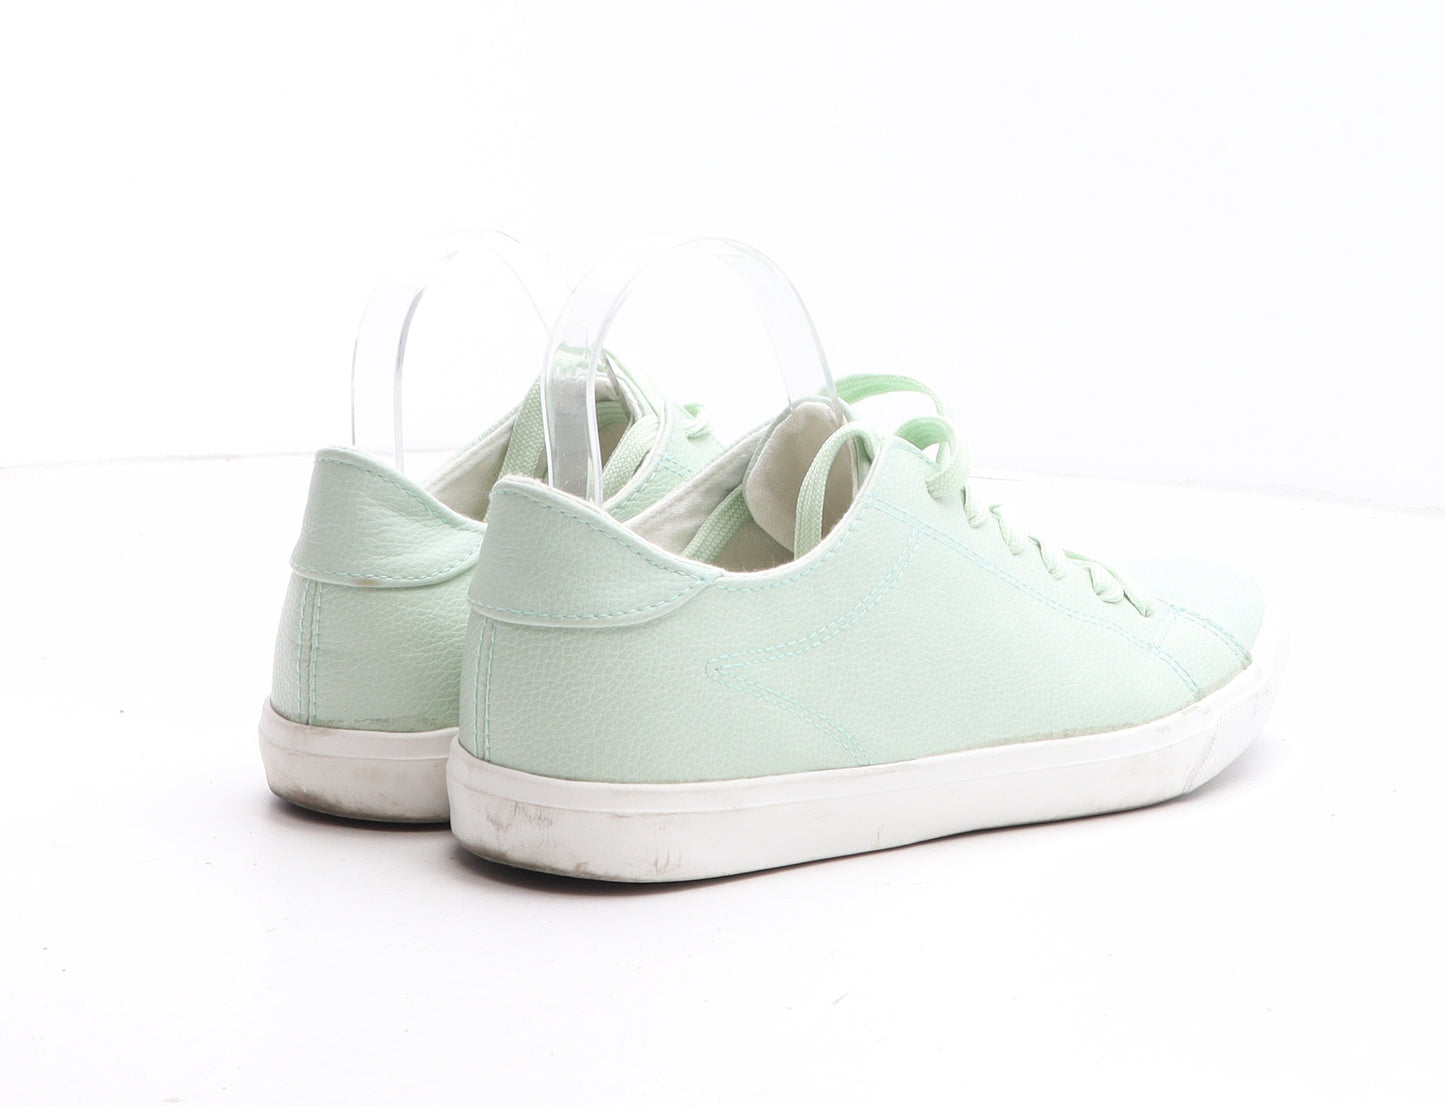 New Look Womens Green Synthetic Trainer UK